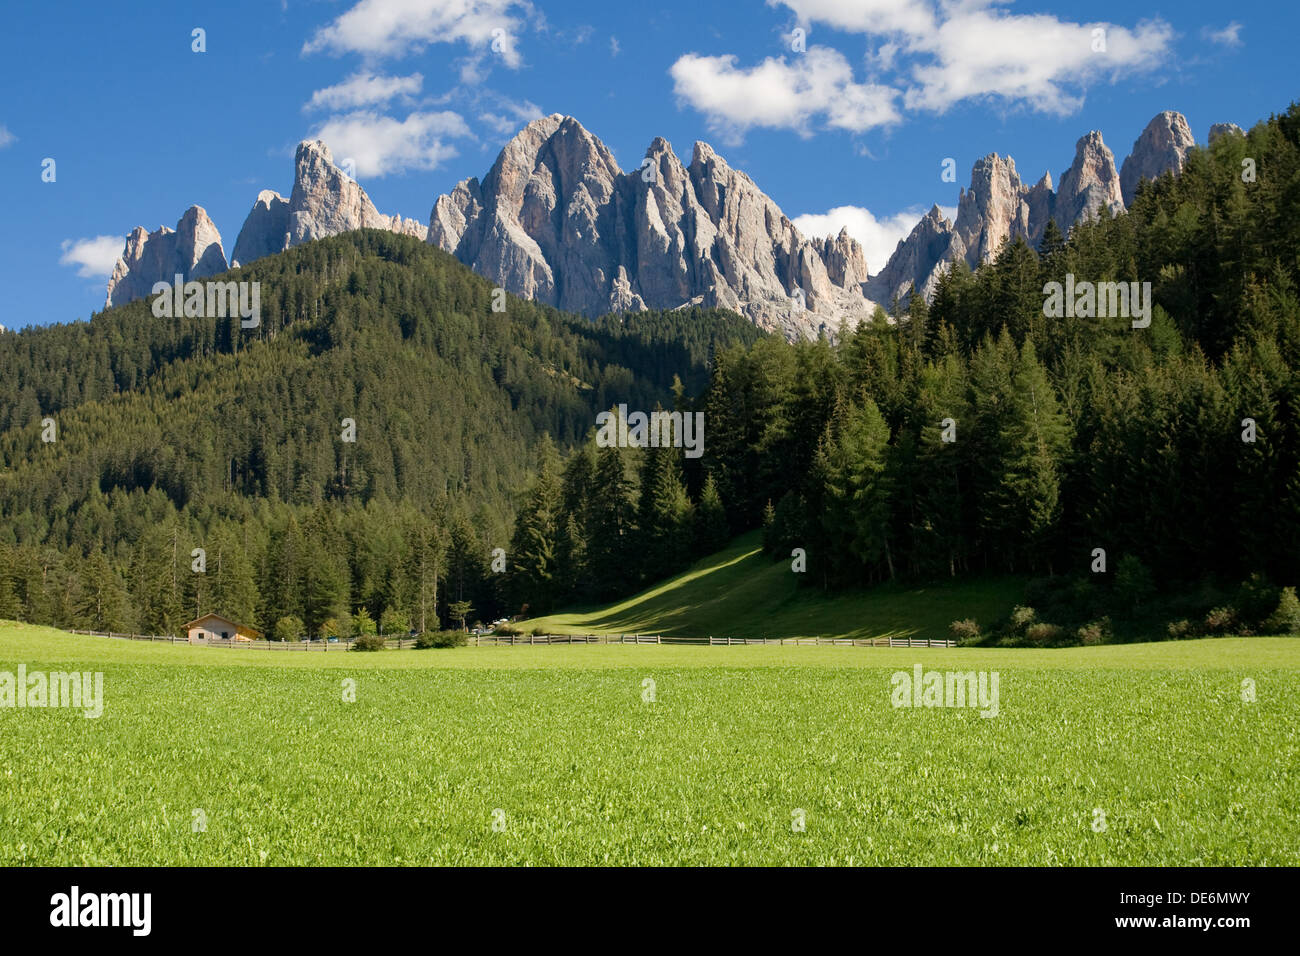 Geisler Gruppe from Villnoss Valley, South Tyrol, Italy. Stock Photo